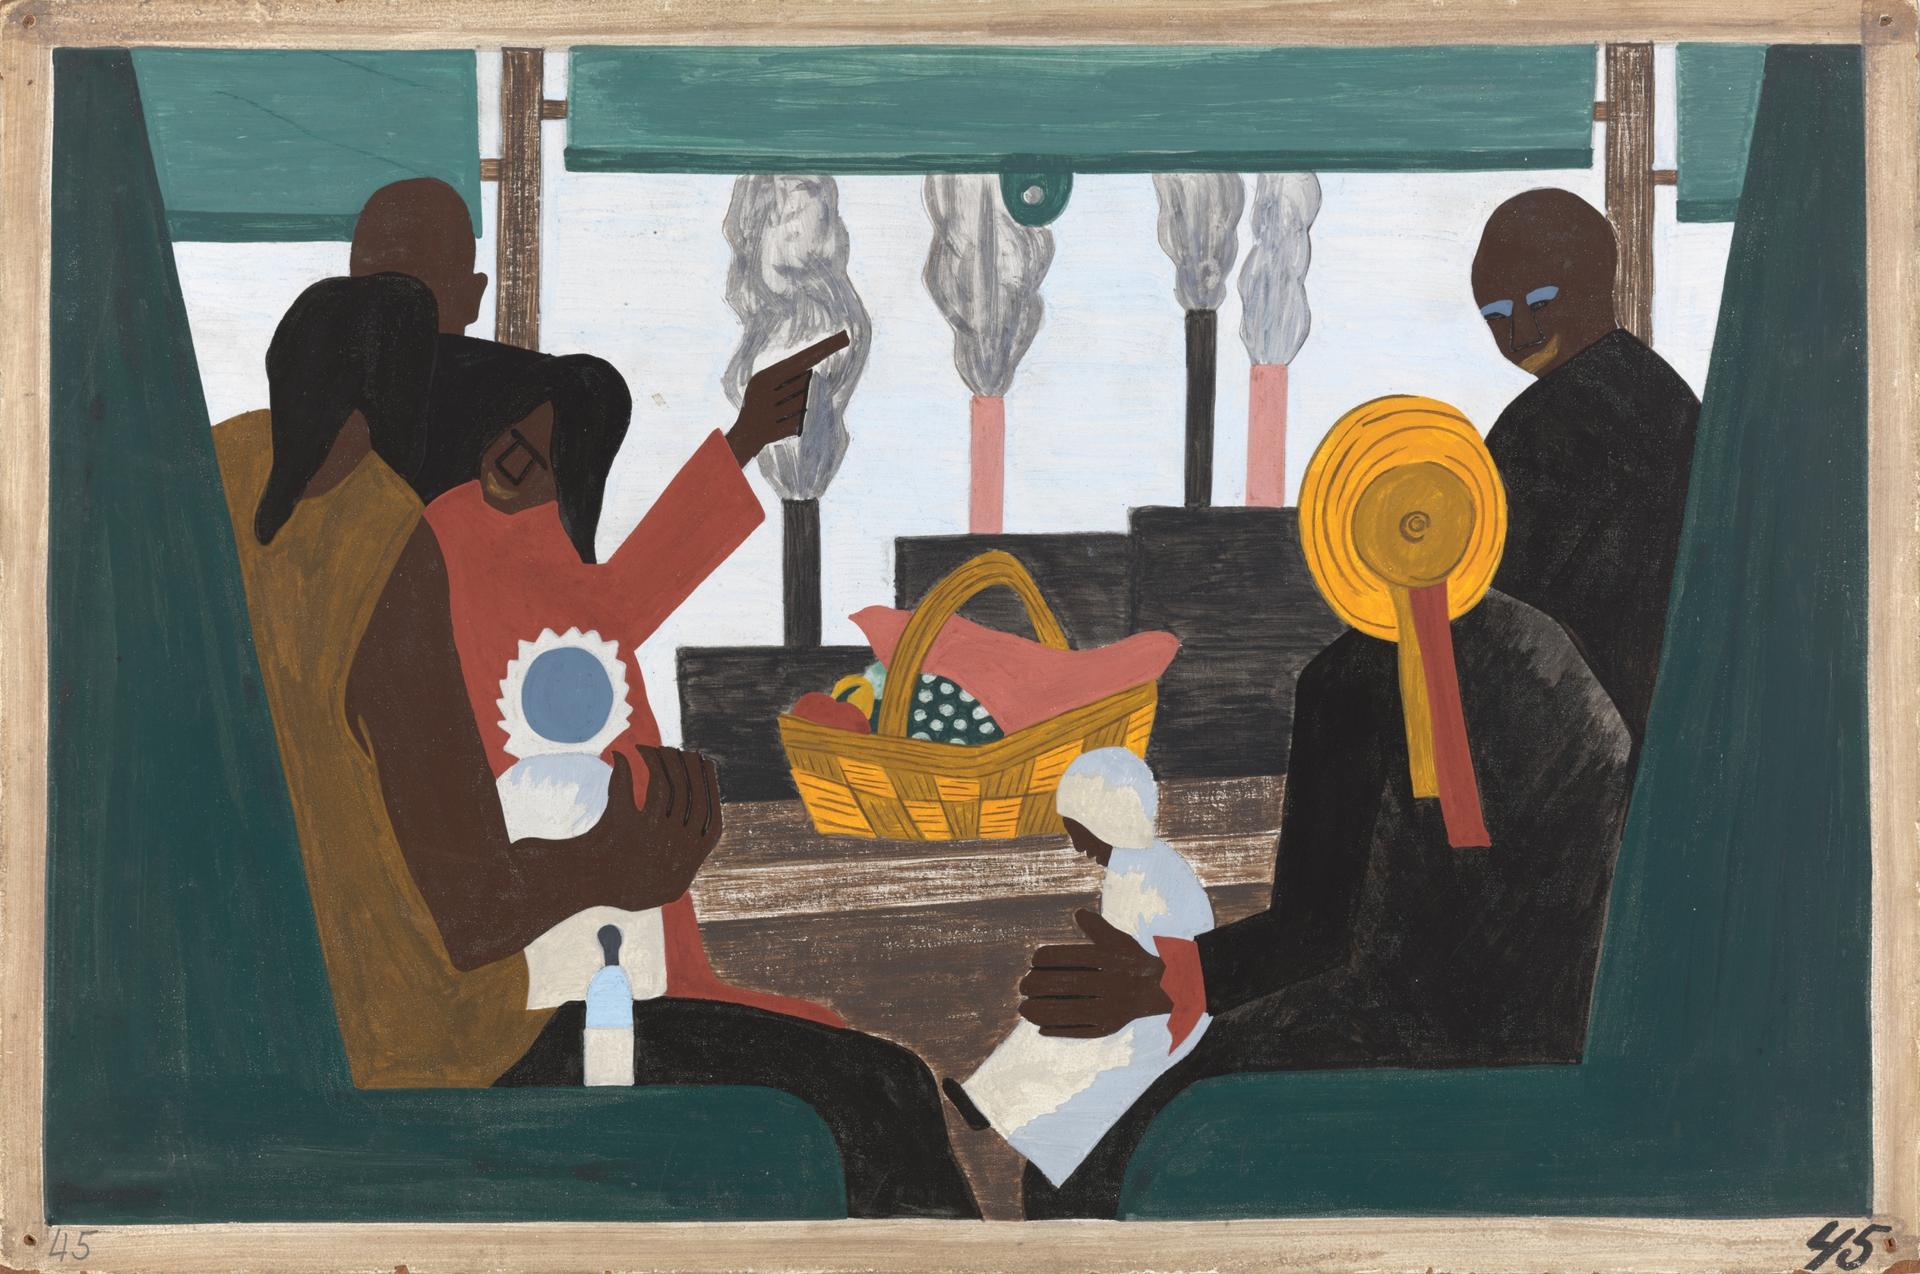 Jacob Lawrence, “The Migration Series, Panel no. 45: The migrants arrived in Pittsburgh, one of the great industrial centers of the North.,” 1940–41. Casein tempera on hardboard, 12 x 18 in.